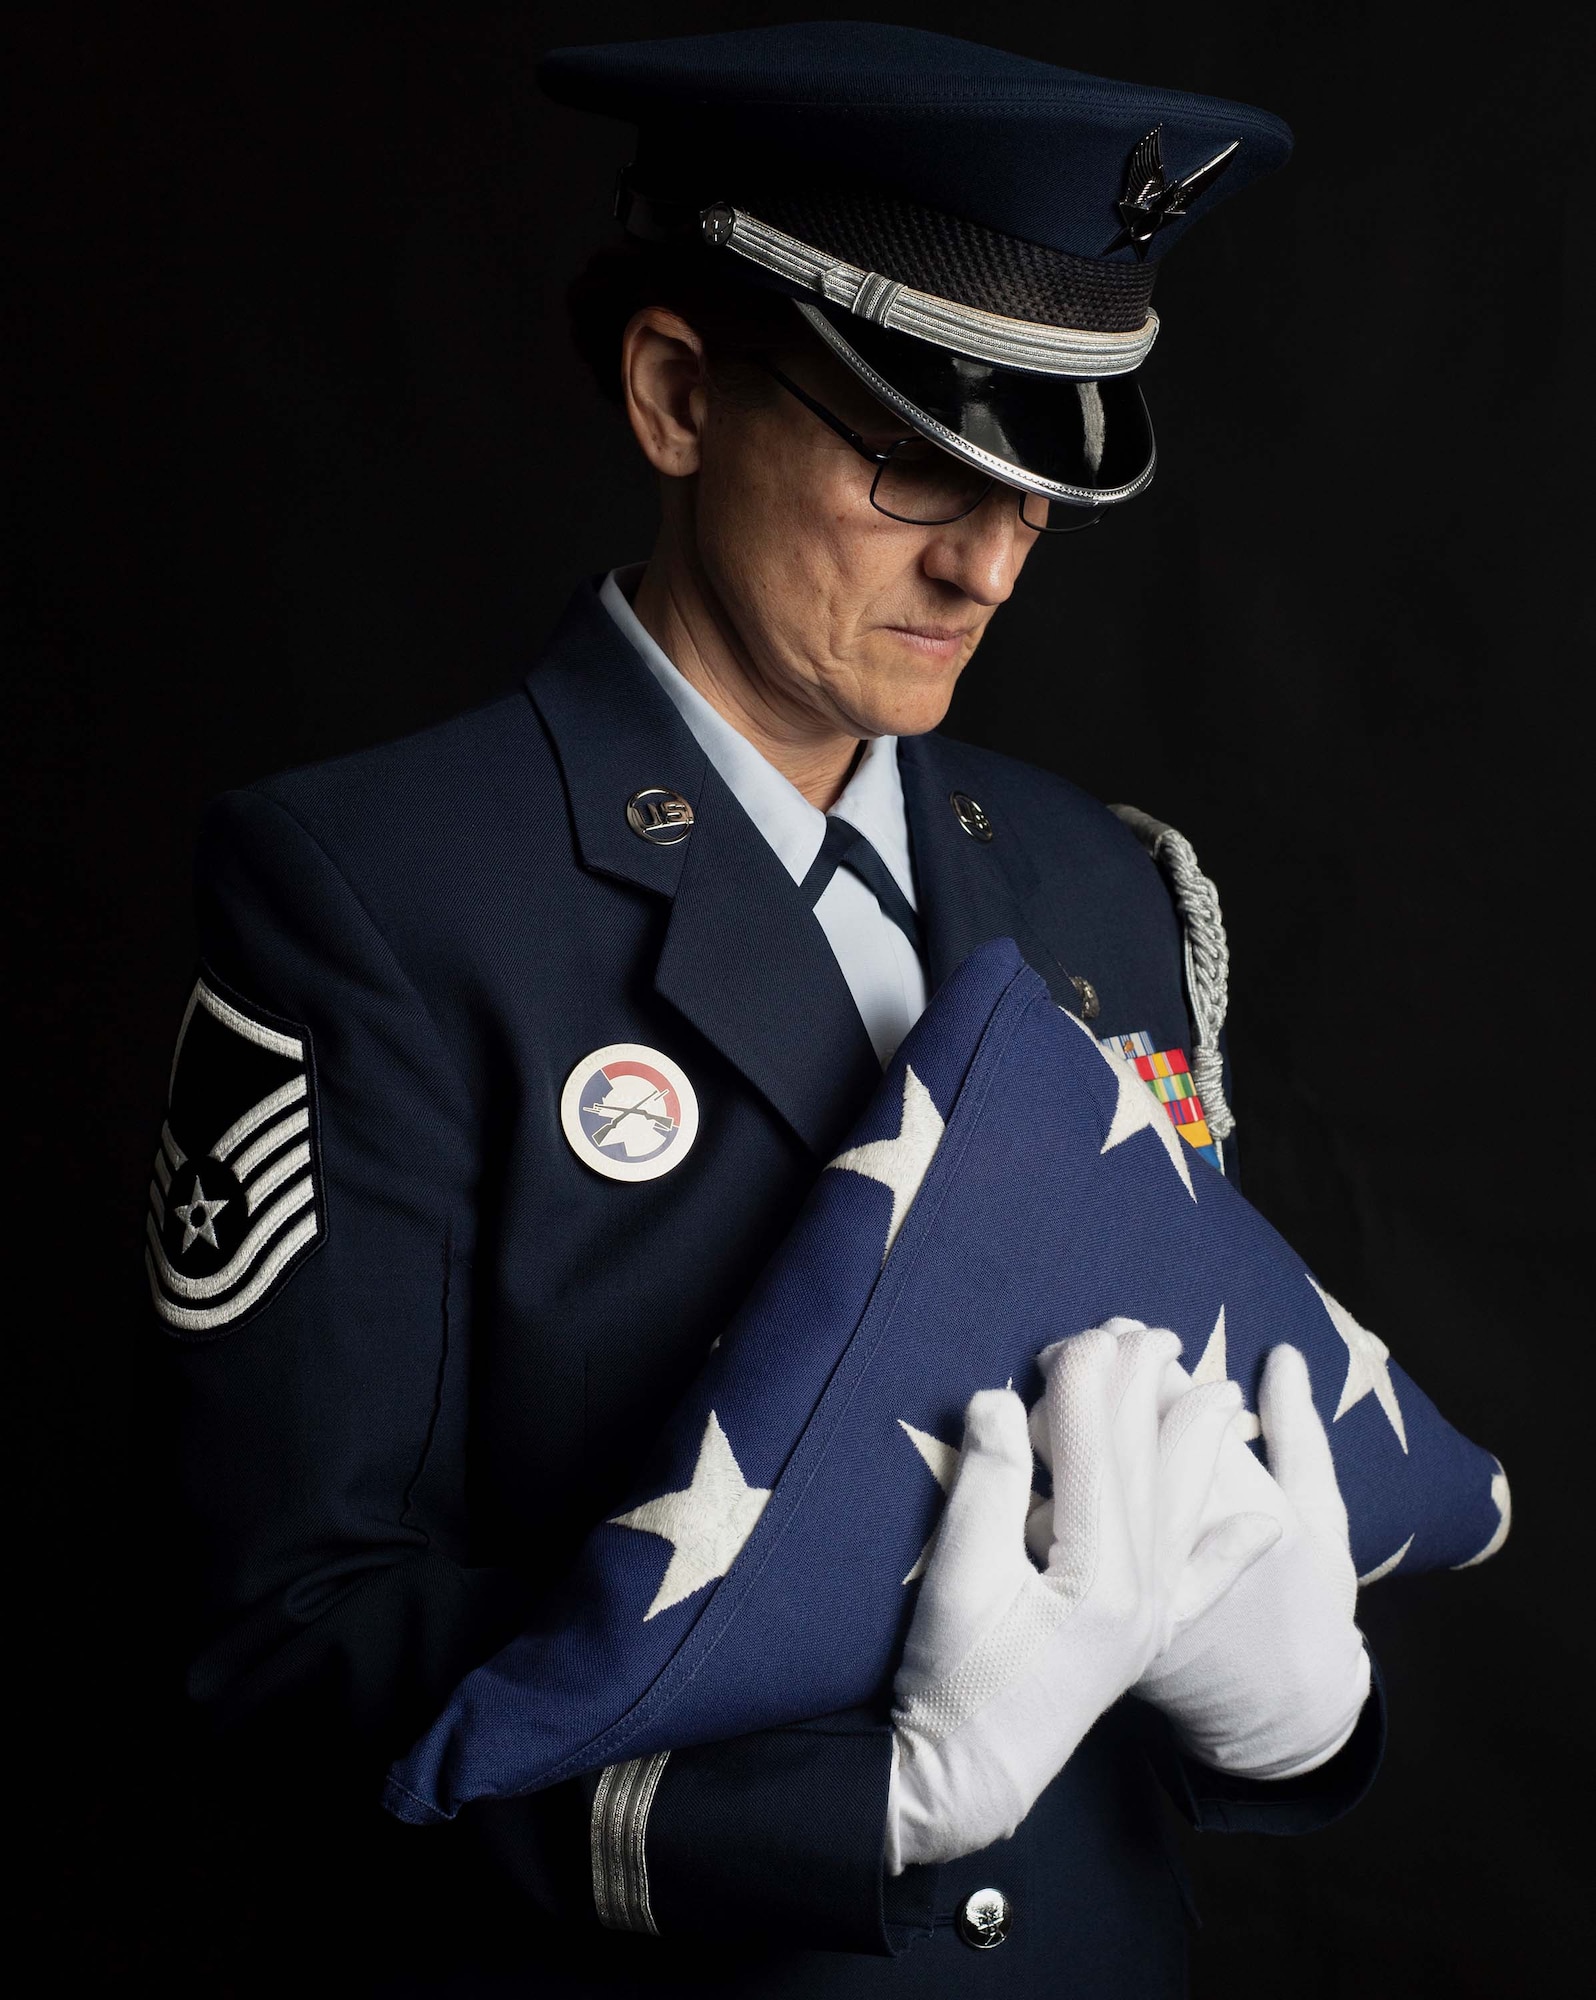 Master Sgt. Carmen LaGuardia poses for photos at Battle Creek Air National Guard Base, Mich., Feb. 5, 2023. LaGuardia is Michigan’s longest serving and most decorated honor guard member, having performed more than 2,000 military details.